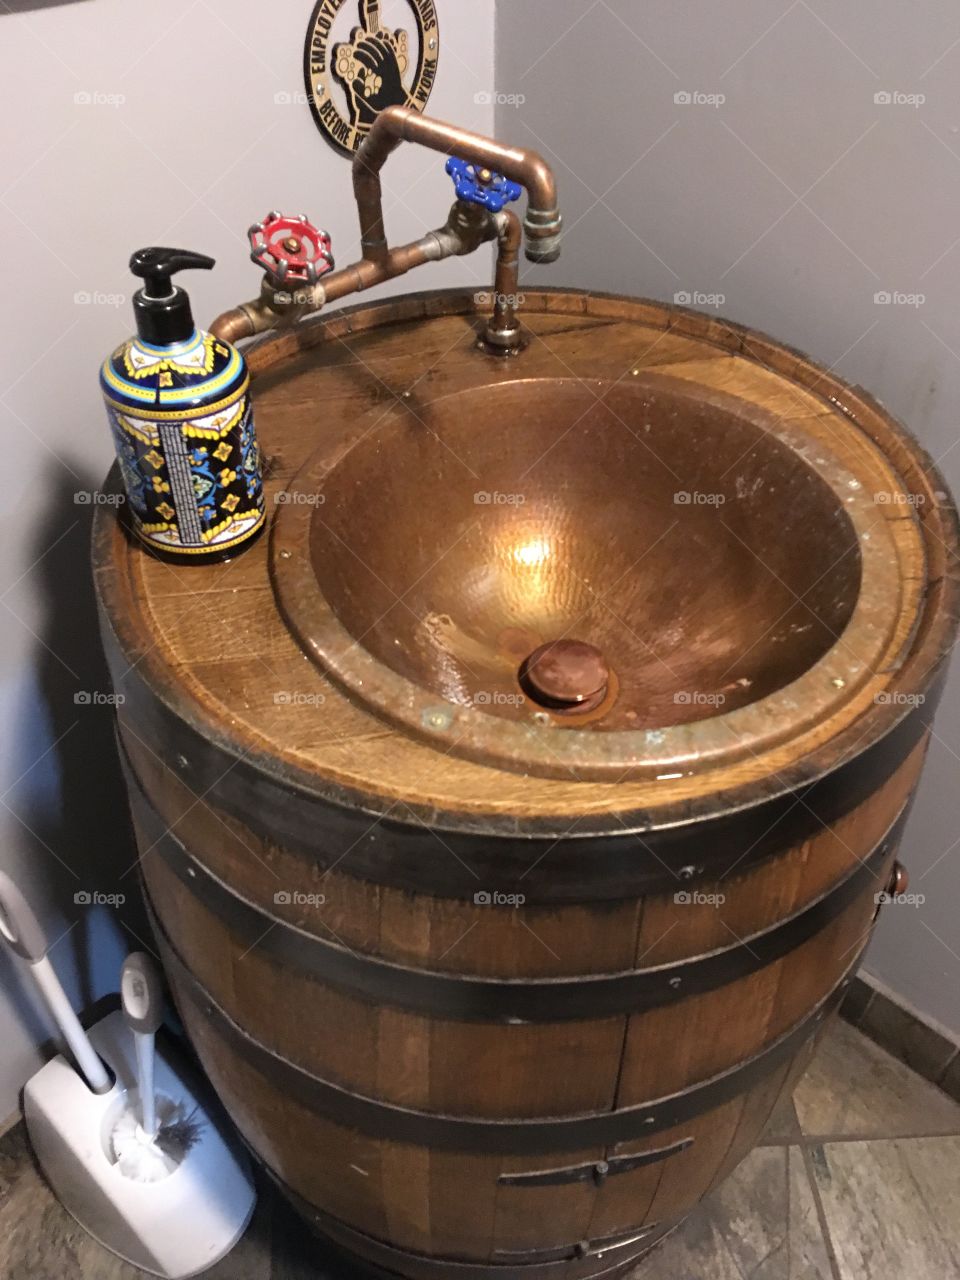 Bathroom sink at local cider house in Connecticut